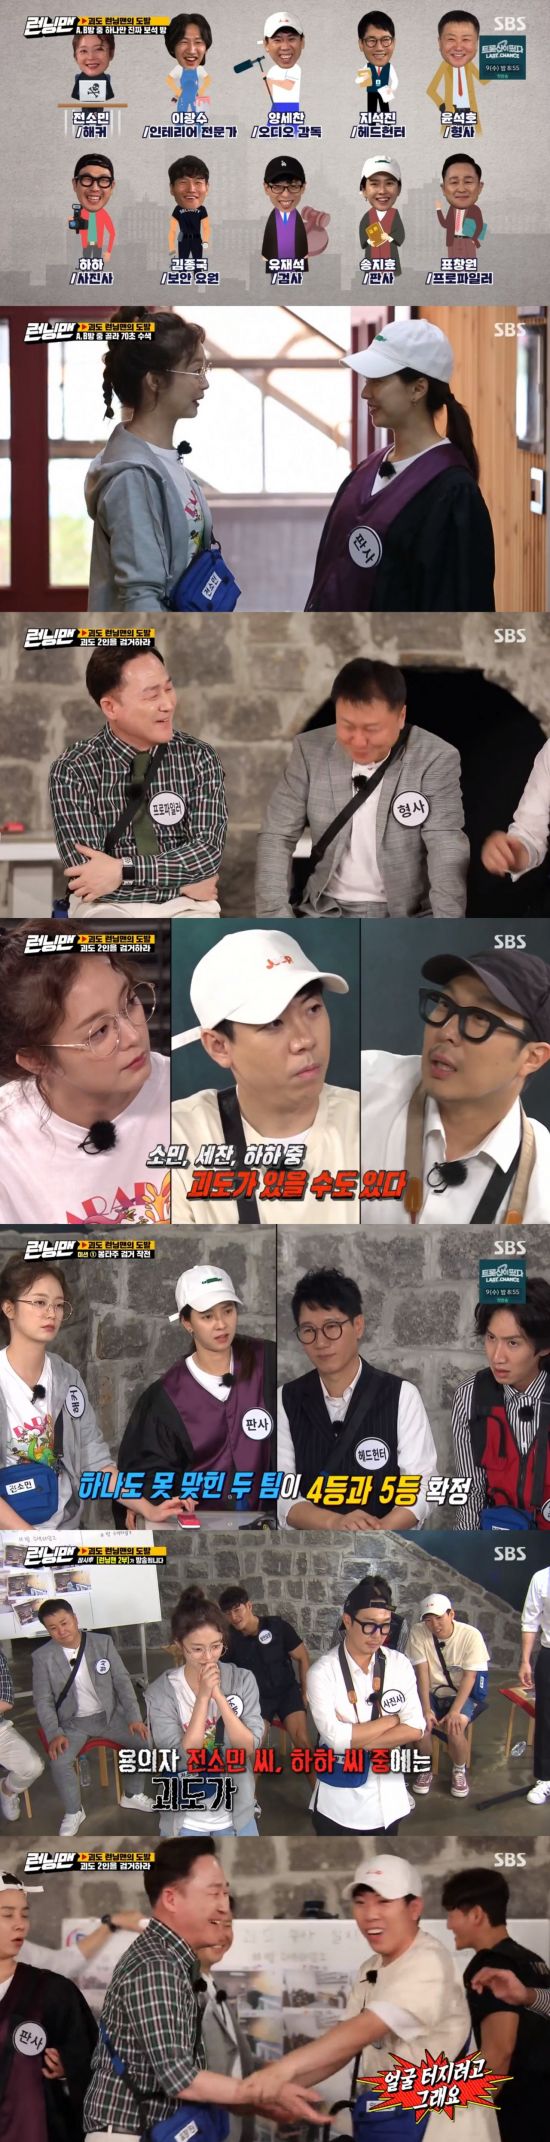 On SBS Running Man broadcasted on the afternoon of the 6th, the citizen team won the victory by arresting Jeon So-min and Haha.On this day, Running Man was conducted as The second special feature of the monster.As a guest, Pyo Chang-wonwonwon, the first domestic profiler, and Yoon Seok-ho Detective, the actual model of crime city of Ma Dong-seok, appeared, and the members admired that the real thing appeared.The second round of the mass Choices first, like the first.Jeon So-min - Hacker, Lee Kwang-soo - Interior specialist, Yang Se-chan - Audio director, Ji Suk-jin - Headhunter, Yoon Seok-ho - Detective, Haha - Photographer, Kim Jong-kook - Security agent, Yoo Jae-Suk - Prosecutor, Song Ji-hyo - Judge, Pyo Chang-wonwon Won - is designated as Profiler.The second round of the goblin had to arrest two goblins who were not invited to the joint birthday of Jaeseok-Haha-Jihyo; the goblins were the winner if they stole more than 100 jewellery.Pyo Chang-wonwonwon and Yoon Seok-ho were actually monitoring all the members coming in.Both pointed out that Jeon So-min came too early and revealed that they were most suspected of the gangster.In the first room Caught in the Web time, two members paired up and entered the A and B rooms.After Caught in the Web, Pyo Chang-wonwonwon said, Song Ji-hyo and Jeon So-min made scissors rocks and Jeon So-min won, and Jeon So-min went into room B.Lee Kwang-soo and Ji Suk-jin are all trying to get into room A, a little bit of room A seems to be quite important, he said.Yoon Seok-ho said, I originally visited the residential area a few days before the thieves robbed during the holiday.I start work after looking at whether there is CCTV, what is around, whether the house is on or off. At this time, Lee Kwang-soo said a few words, and the audio director Yang Se-chan, who has the authority to stop the members mouths, laughed with a mask on Lee Kwang-soos mouth, saying, I will stop this brothers mouth.Yoo Jae-Suk said: One of the weirdest things was that I came the fourth time and the prosecutor and the judge were not out.So one of the three people who came before me could be a goblin. Jeon So-min - Haha - Yang Se-chan was put on the goblin dragon line.He was then given a mission to draw and arrest a sketch.The members paired up with two members, one of whom had to find a sketch according to the crews explanation, and the other one had to find the main character of the sketch among the staff and members in the studio.The first and second figures were among the staff; the Yoo Jae-Suk - Yang Se-chan, Pyo Chang-wonwonwon - Kim Jong-kook teams were the correct answer, respectively.The third was a slightly rotten, amber-like face, a slightly thin head to touch on the shoulder, a little bigger in the eyes, a little higher in the nose, and a little cremation.In this explanation, Yoon Seok-ho Detective pointed out Lee Kwang-soo and was the right answer.Ji Suk-jin - Lee Kwang-soo, Jeon So-min - Song Ji-hyo, who became fifth and fourth in the game, was released.And the production team revealed that there were zero jewels stolen by Gyodo in the Web in the first episode, and Pyo Chang-wonwonwon, who saw the photo, said, The only strange thing is the madman.All the bags are lying down, but they are all built only in Lee Kwang-soos photographs. At this end, Yoon Seok-ho said, I set it up.I tried to feel the weight of the bag, he said, raising suspicions.Yoon Seok-ho, who has the authority to question one person, pointed to Yang Se-chan.I dont understand, but today I have assigned the role sharing to the cast. If it is a gangdo, it is my own leisure. It is the leisure of criminals, said Yoon Seok-ho, Detective.Now it was time for prosecutor Yoo Jae-Suk, who could put a suspected figure on trial for a gangster.Yoo Jae-Suk Choices Haha and Jeon So-minThe crew was able to tell only that there was a goblin/no one among the members who were on the trial at this time, but the production team informed Haha and Jeon So-min that there is goblin among them.The second Caught in the Web followed, and the crew said the gangsters stole 100 jewels, when Yoon Detective said Pyo Chang-wonwonwon was suspicious.Members were able to put the most suspicious person on the bench by voting, and Jeon So-min, who won the most votes, was again on the bench.The production team confirmed, The mass is right.In the third - final Caught in the Web, the crew informed them that the gobs stole a total of 352 jewels.At the time of the photo release, Kim Jong-kook commented, You can see how you moved the jewels by seeing the people. The members began to analyze the photos of the people.While several others were nominated for the remaining one, Haha finally came to the trial after the persistent Murder, She Wrote of Yoo Jae-Suk and Kim Jong-kook.The production team said Haha was right about the attack. The citizens who succeeded in arresting all two of them won the victory.SBS entertainment program Running Man is broadcast every Sunday at 5 pm